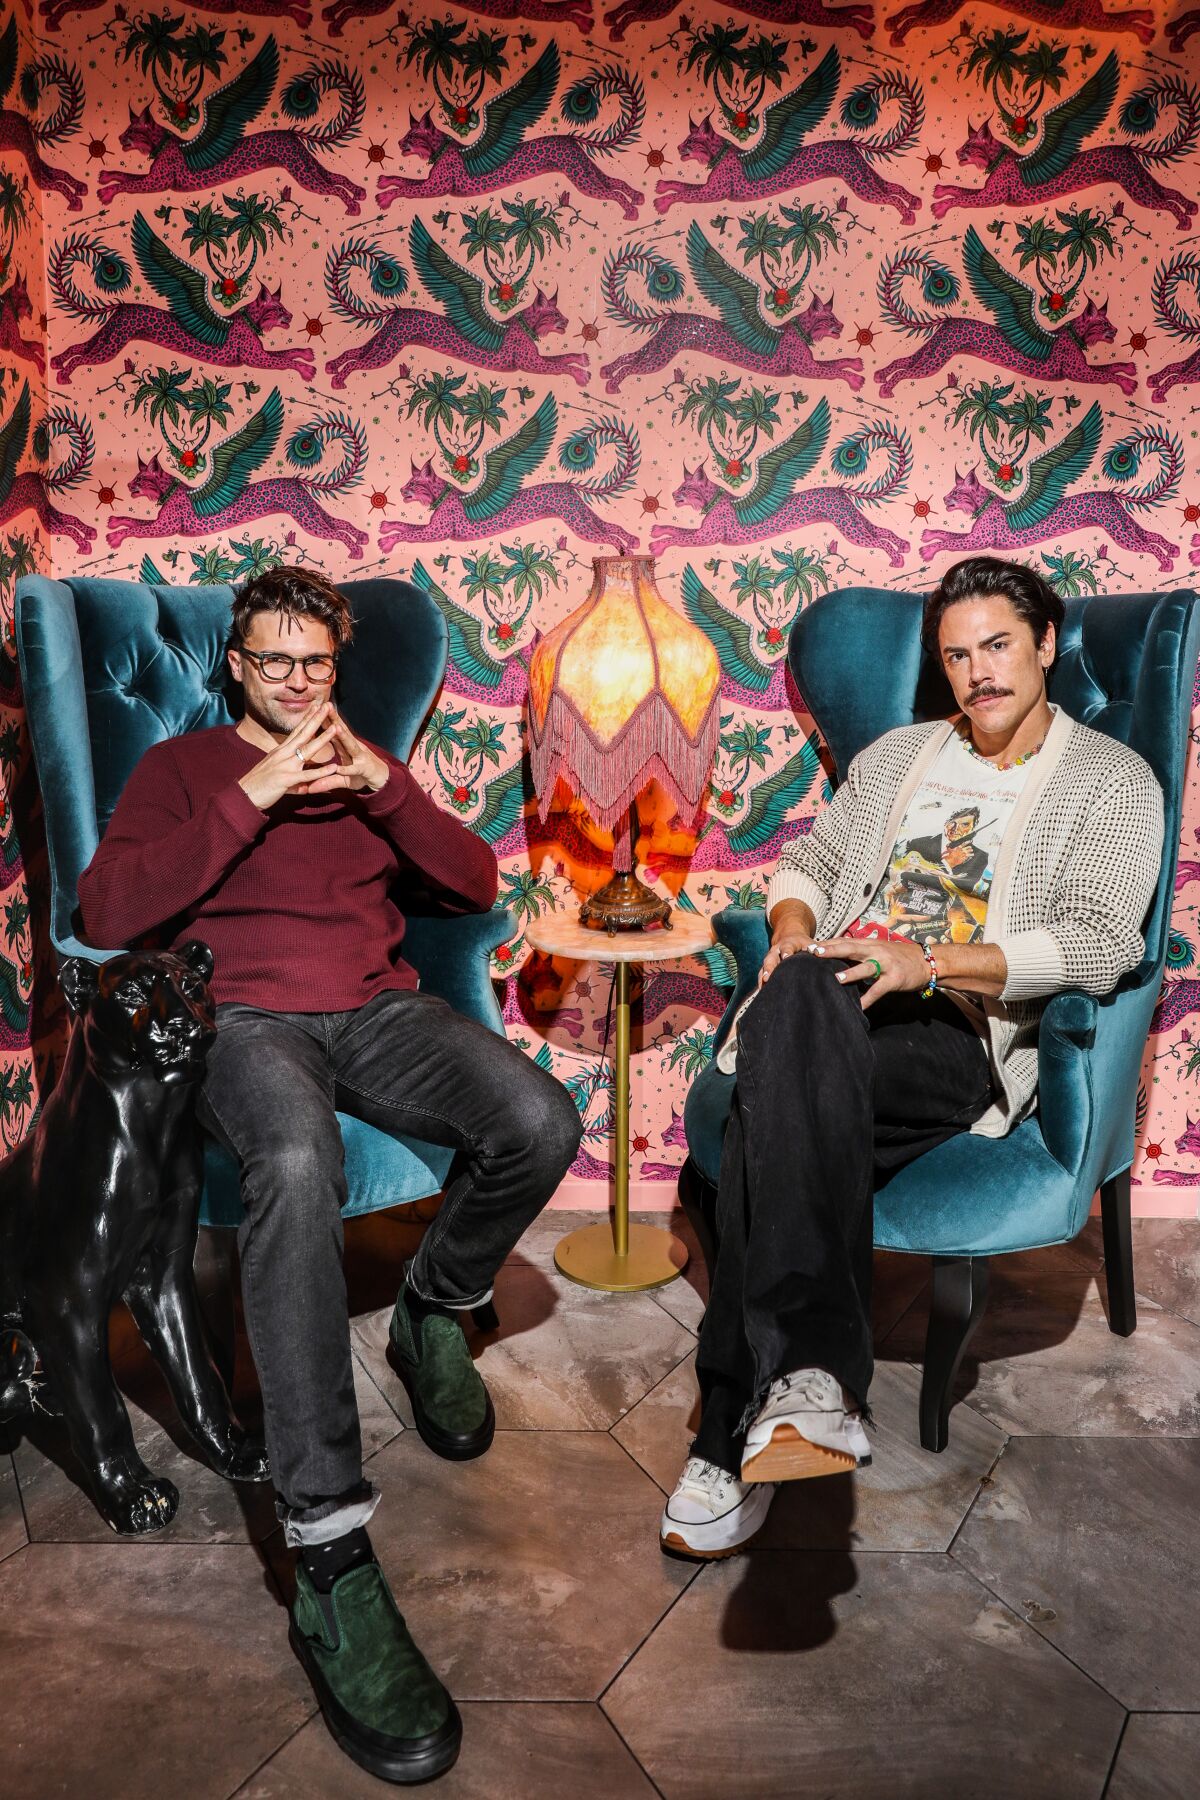 "Vanderpump Rules" stars Tom Sandoval and Tom Schwartz sit in arm chairs in front of a pink and green patterned wall.